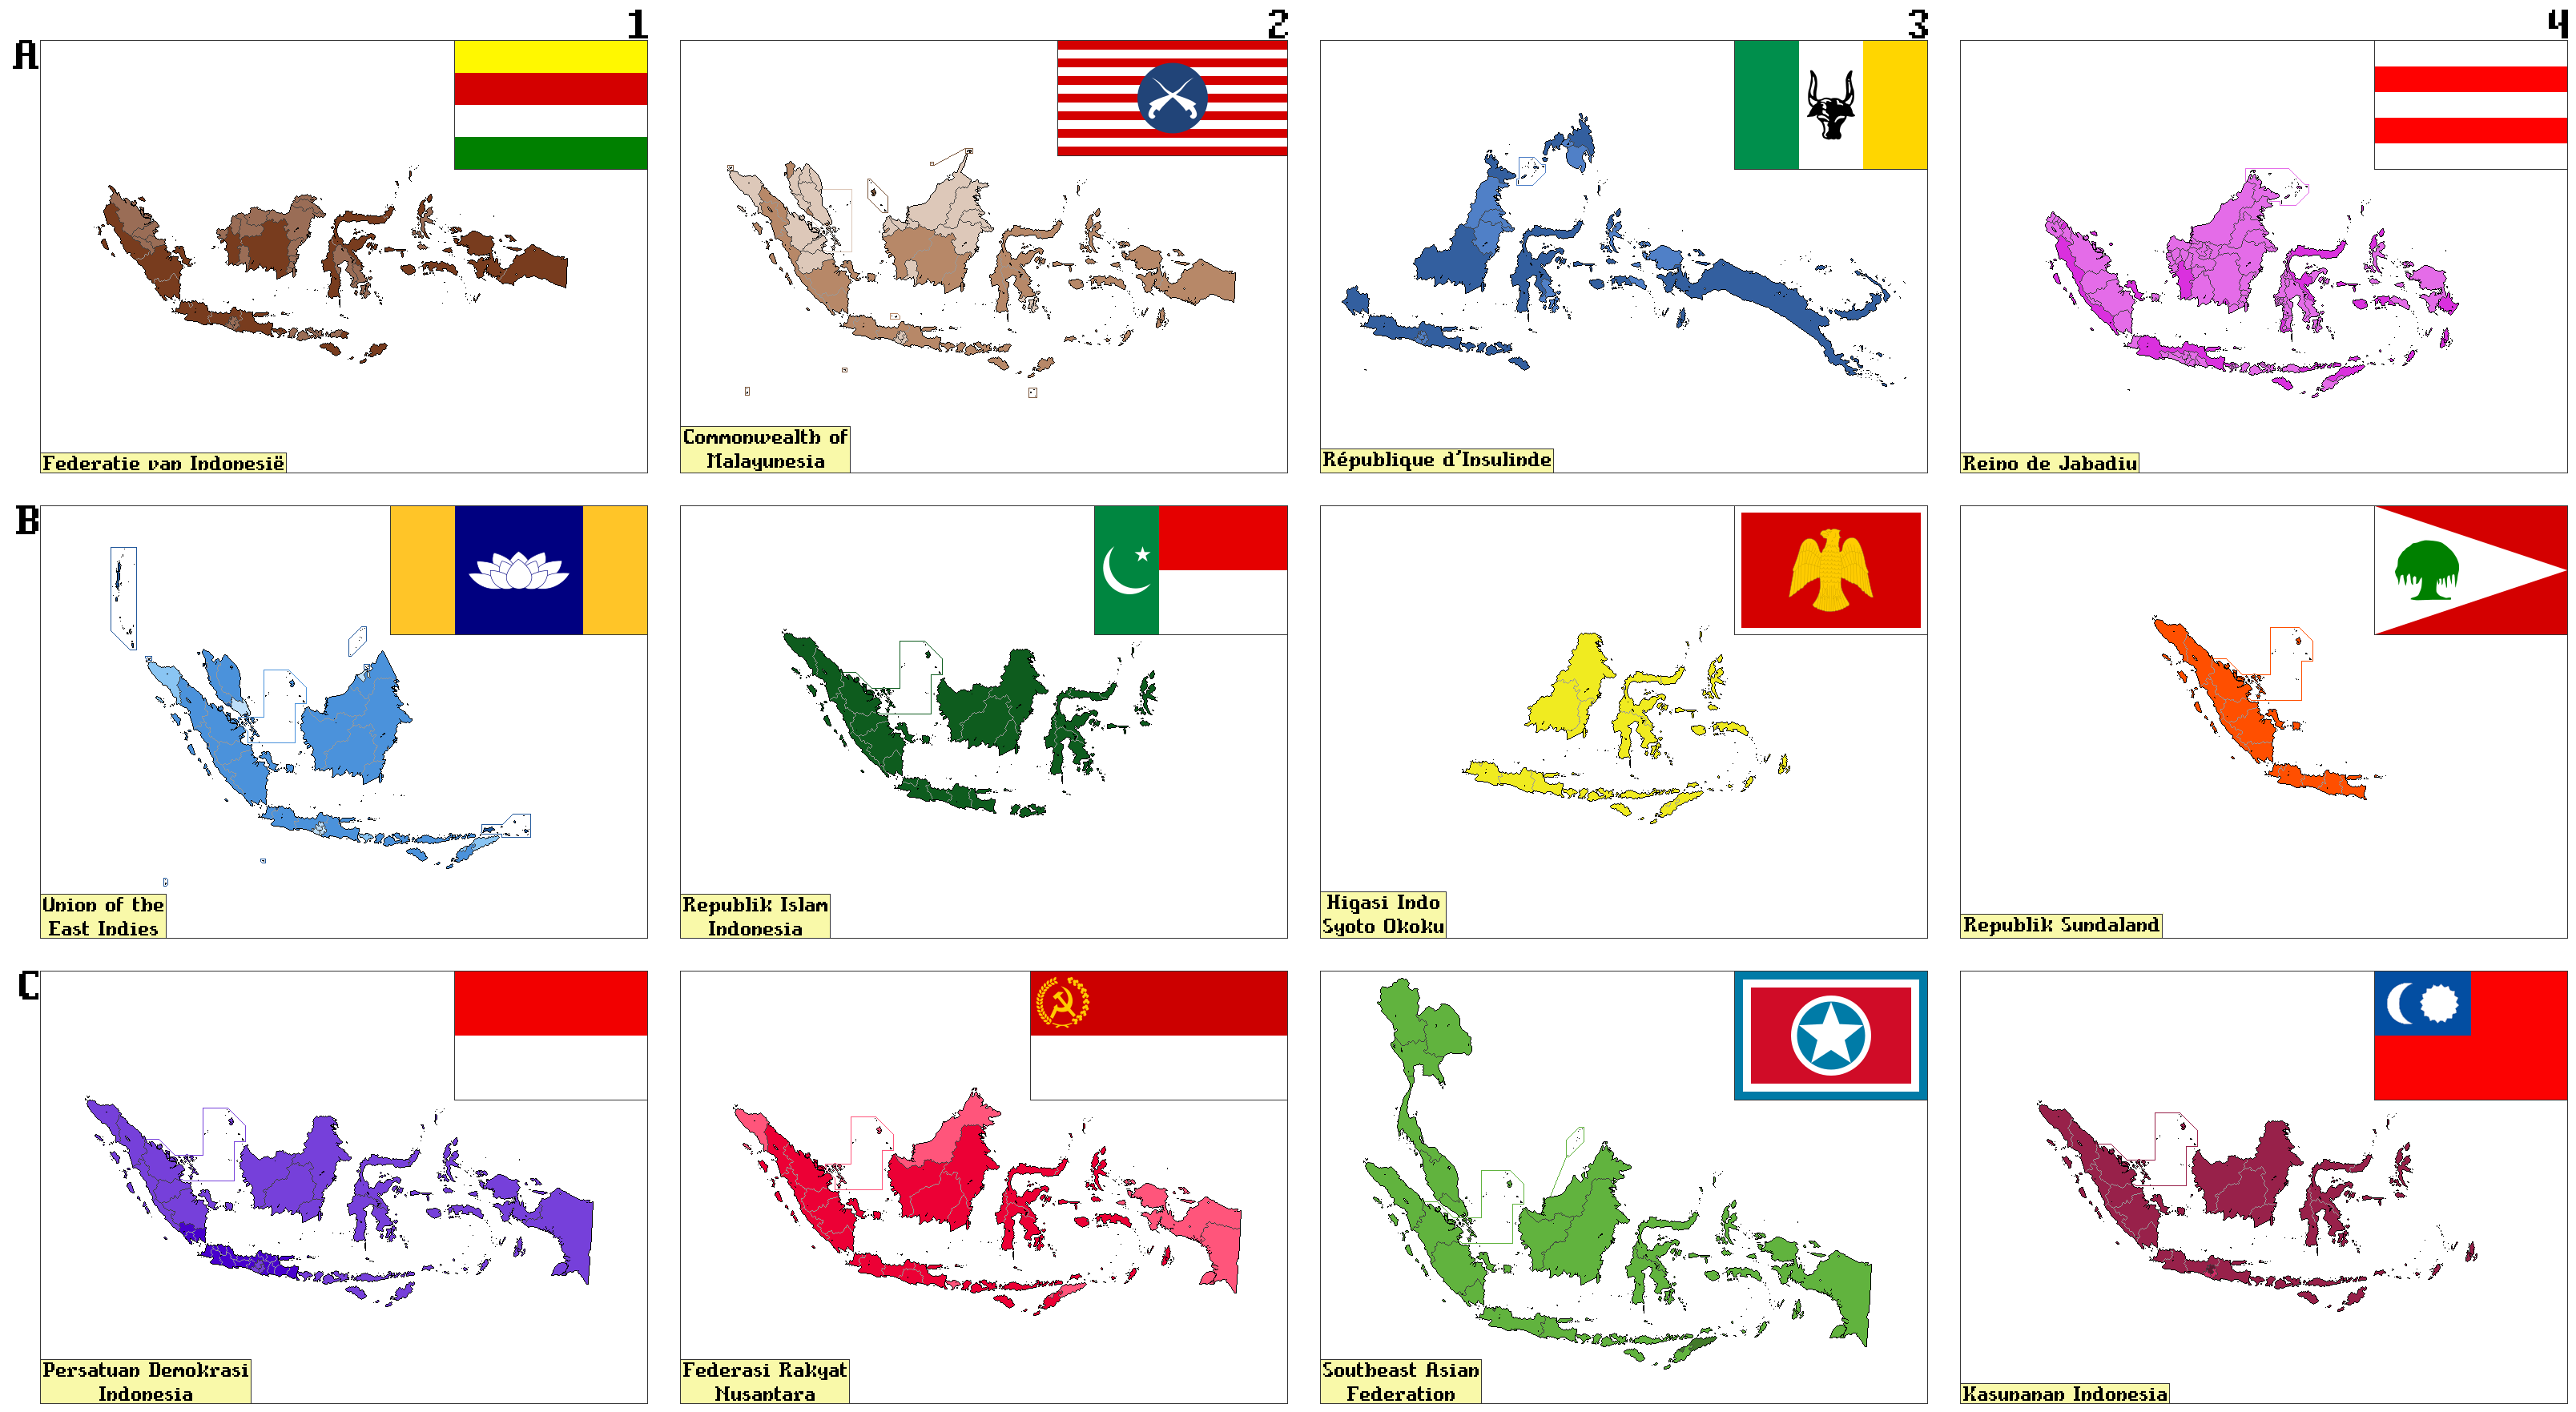 12 Indonesias.png